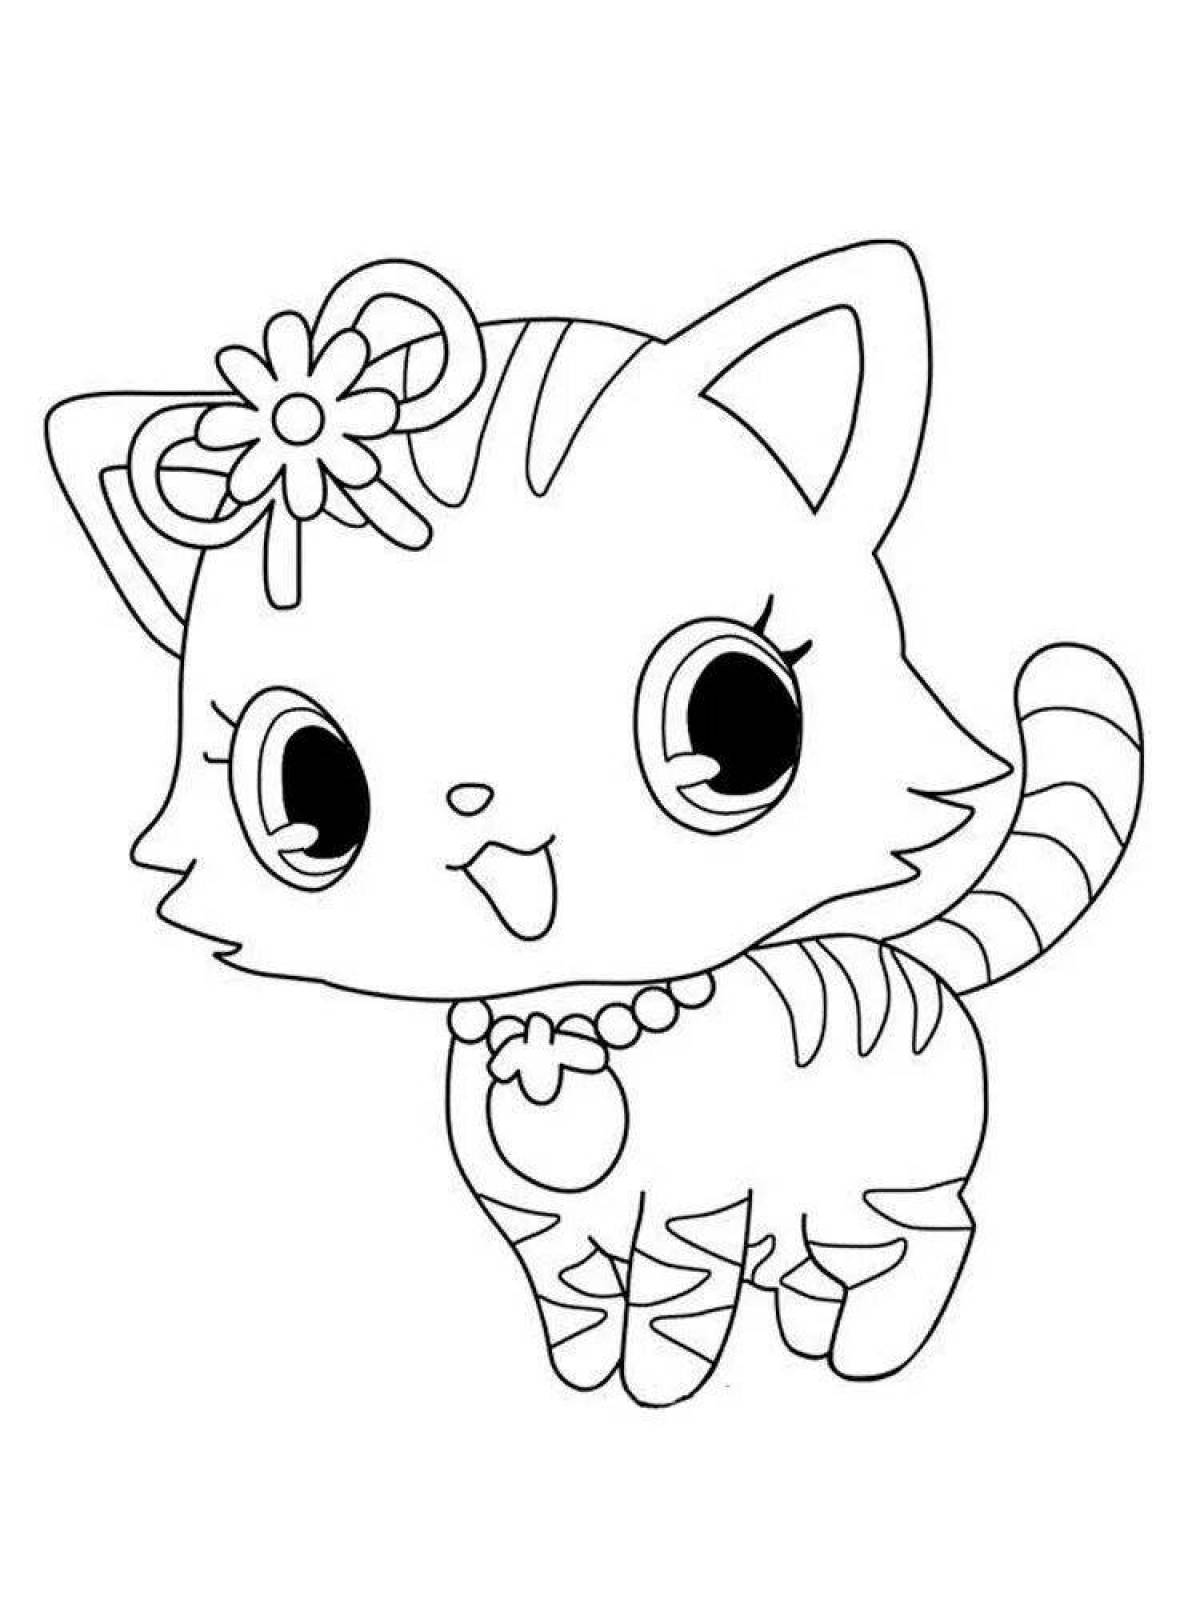 Coloring book shining lily kitty